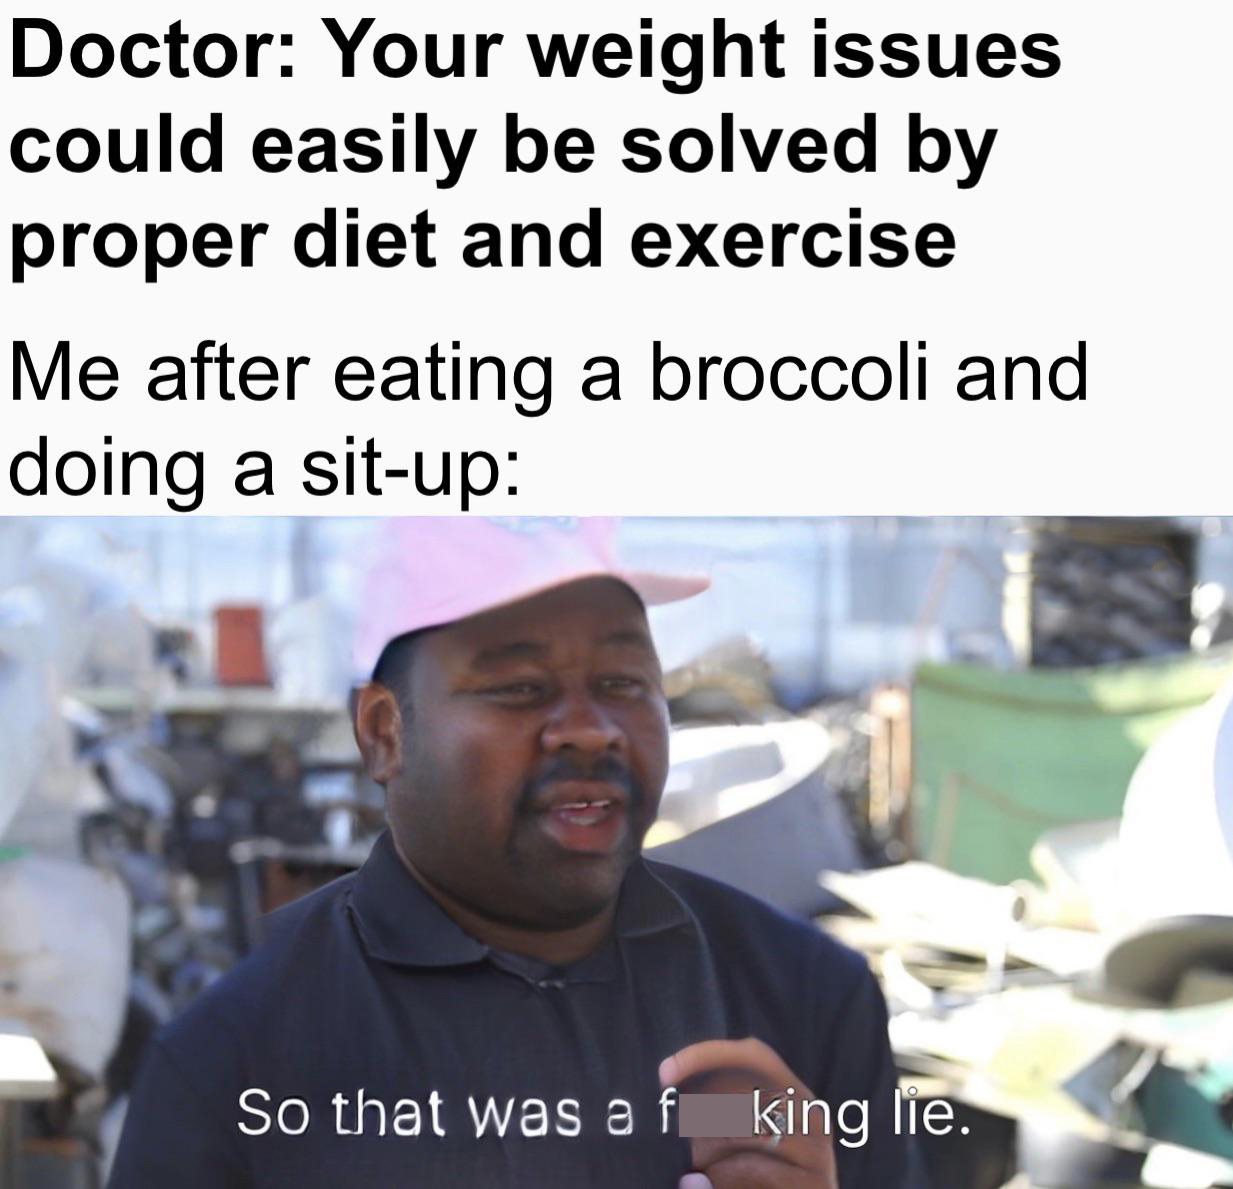 dank memes - r hololive olivia - Doctor Your weight issues could easily be solved by proper diet and exercise Me after eating a broccoli and doing a situp So that was a f king lie.